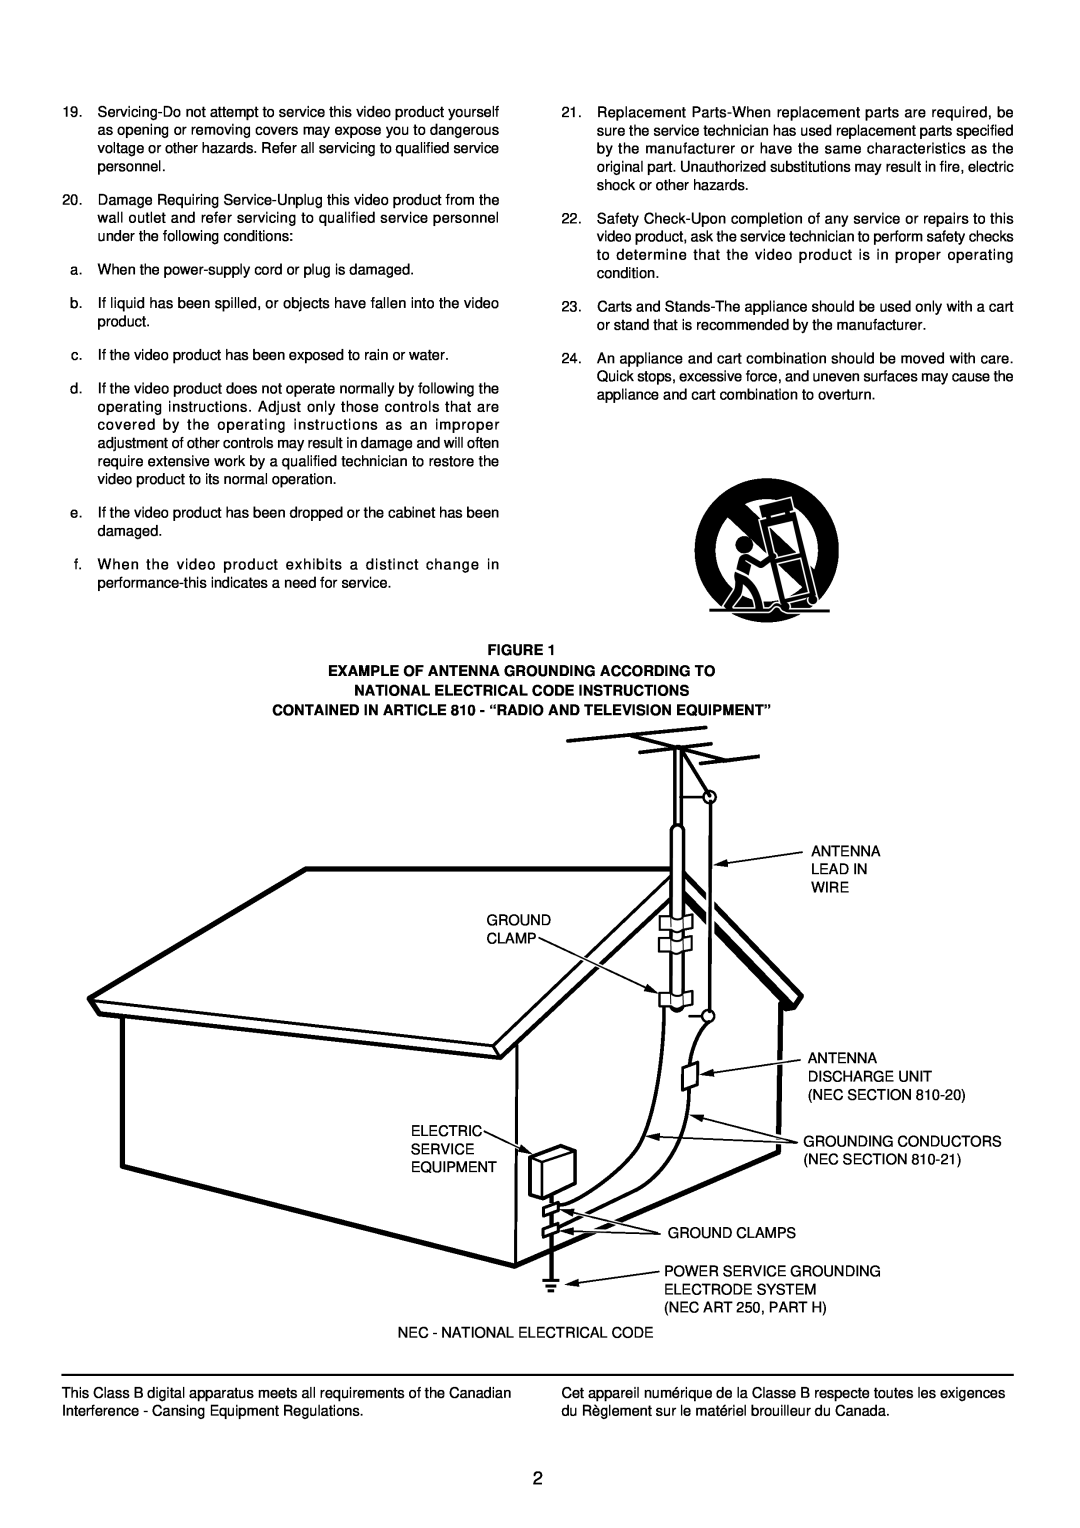 Marantz SR-18EX manual Figure Example Of Antenna Grounding According To, National Electrical Code Instructions 